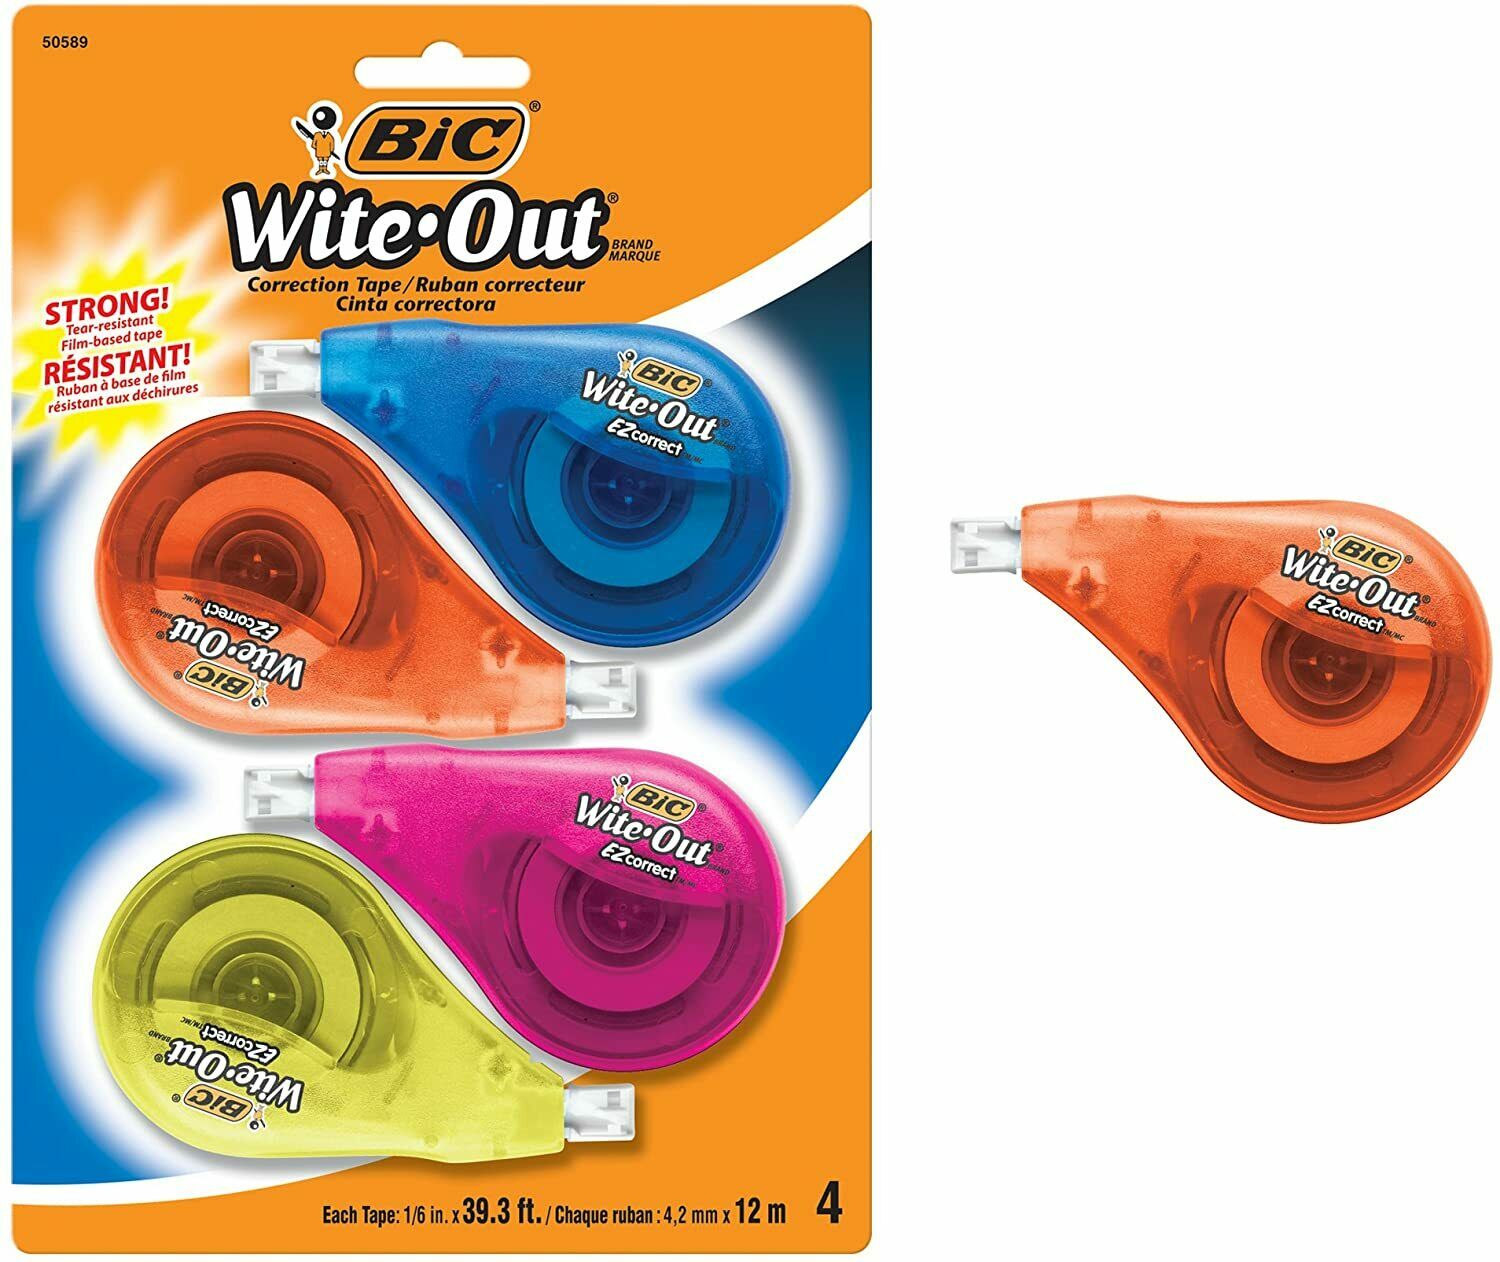 Bic White-out Brand Ez Correct Correction Tape 4 Pack Bic Wite Out Tape